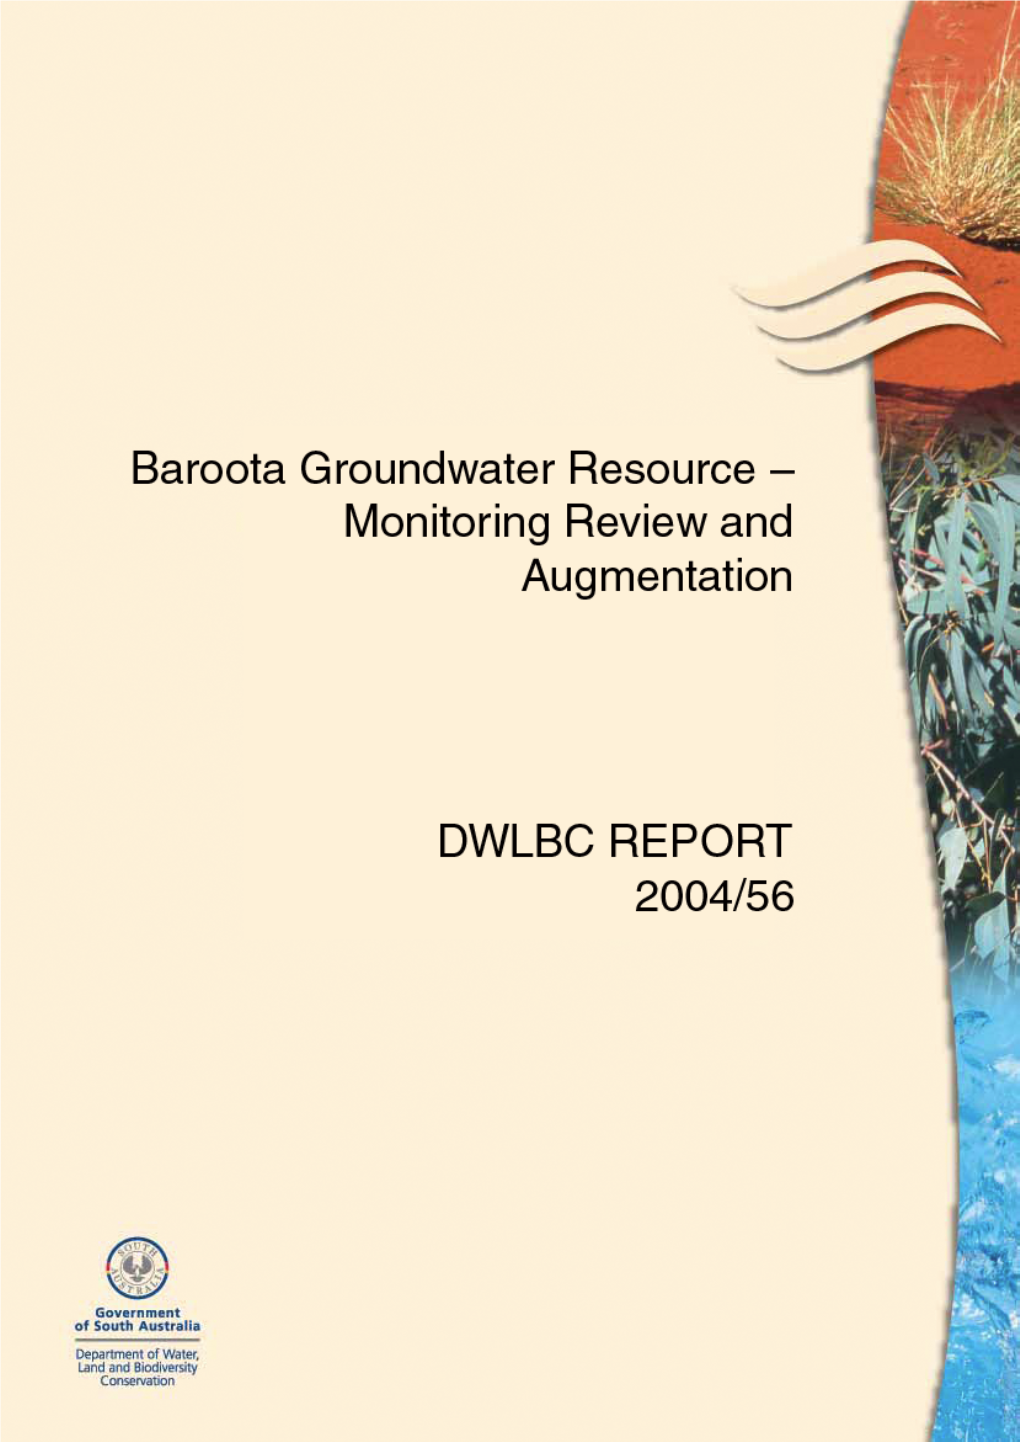 Baroota Groundwater Resource – Monitoring Review and Augmentation